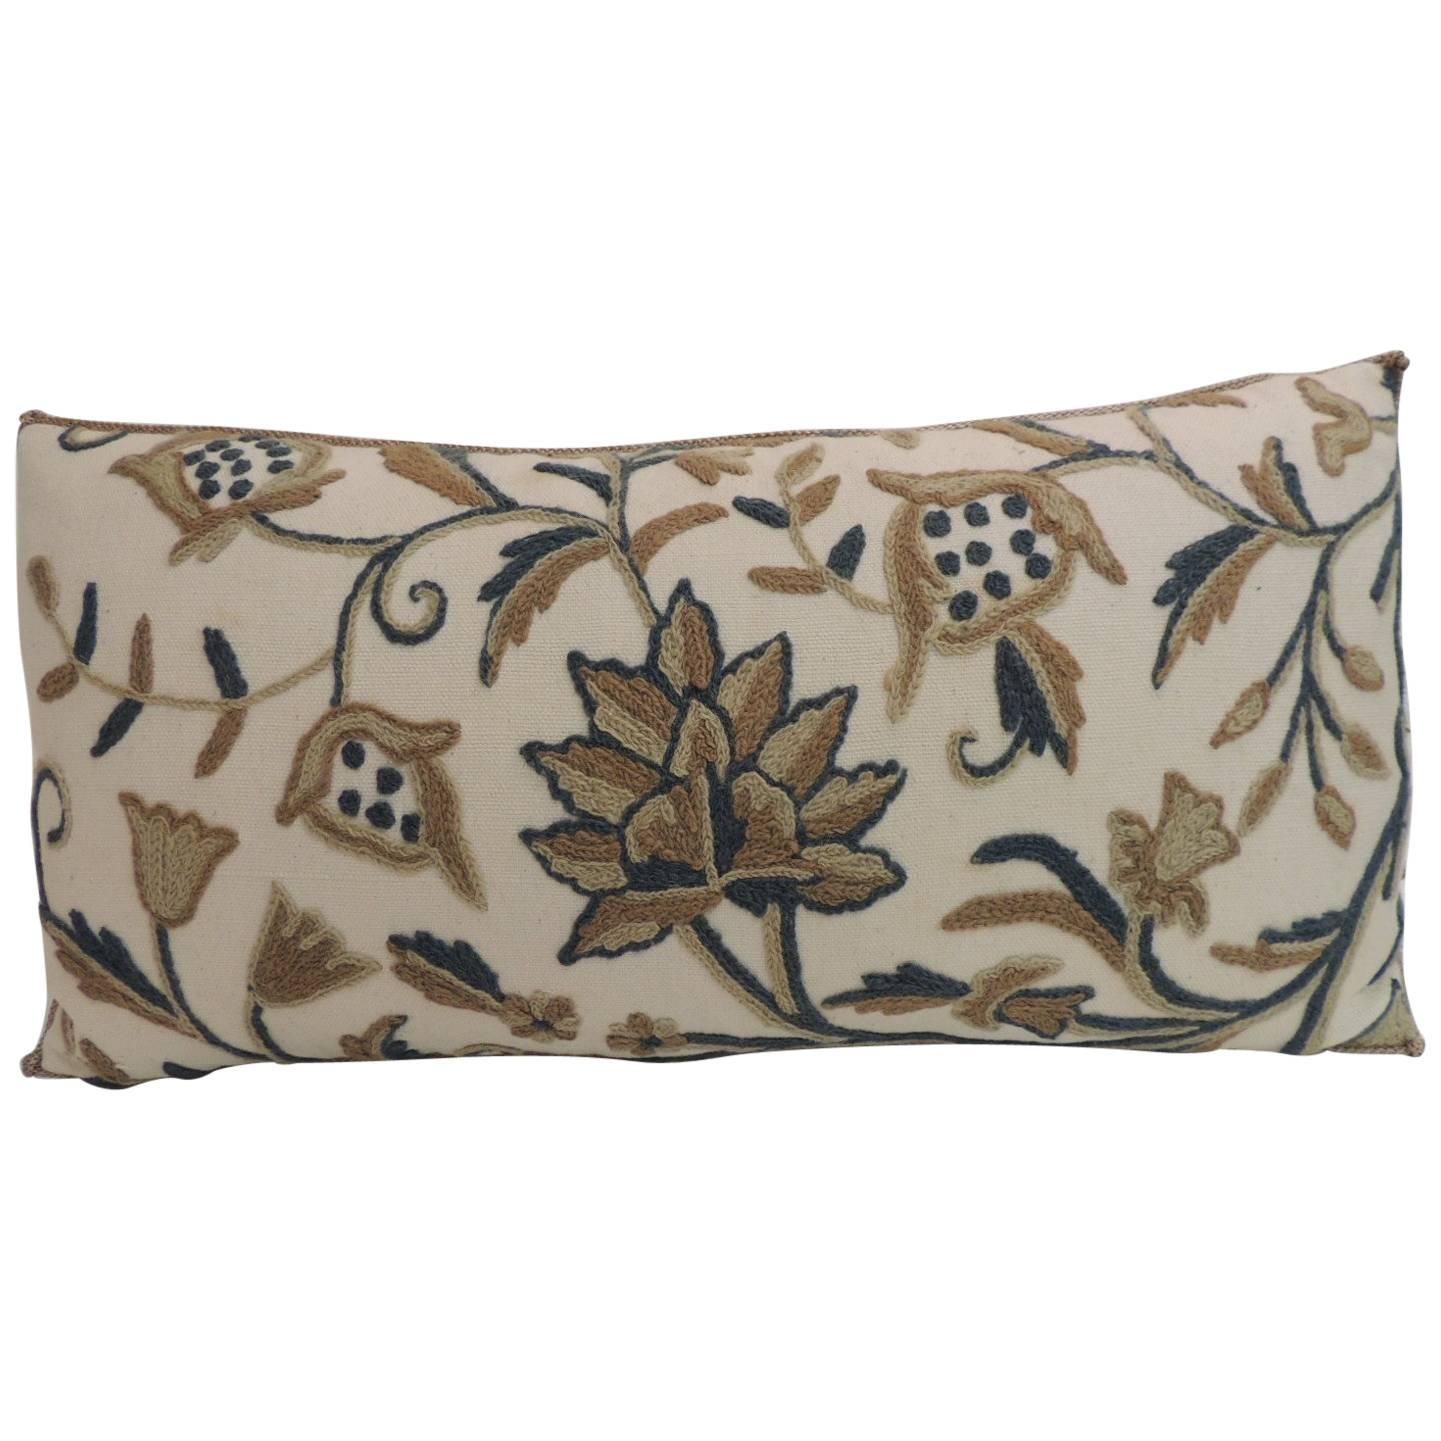 Vintage Tan and Green Crewel Work Floral Decorative Bolster Pillow